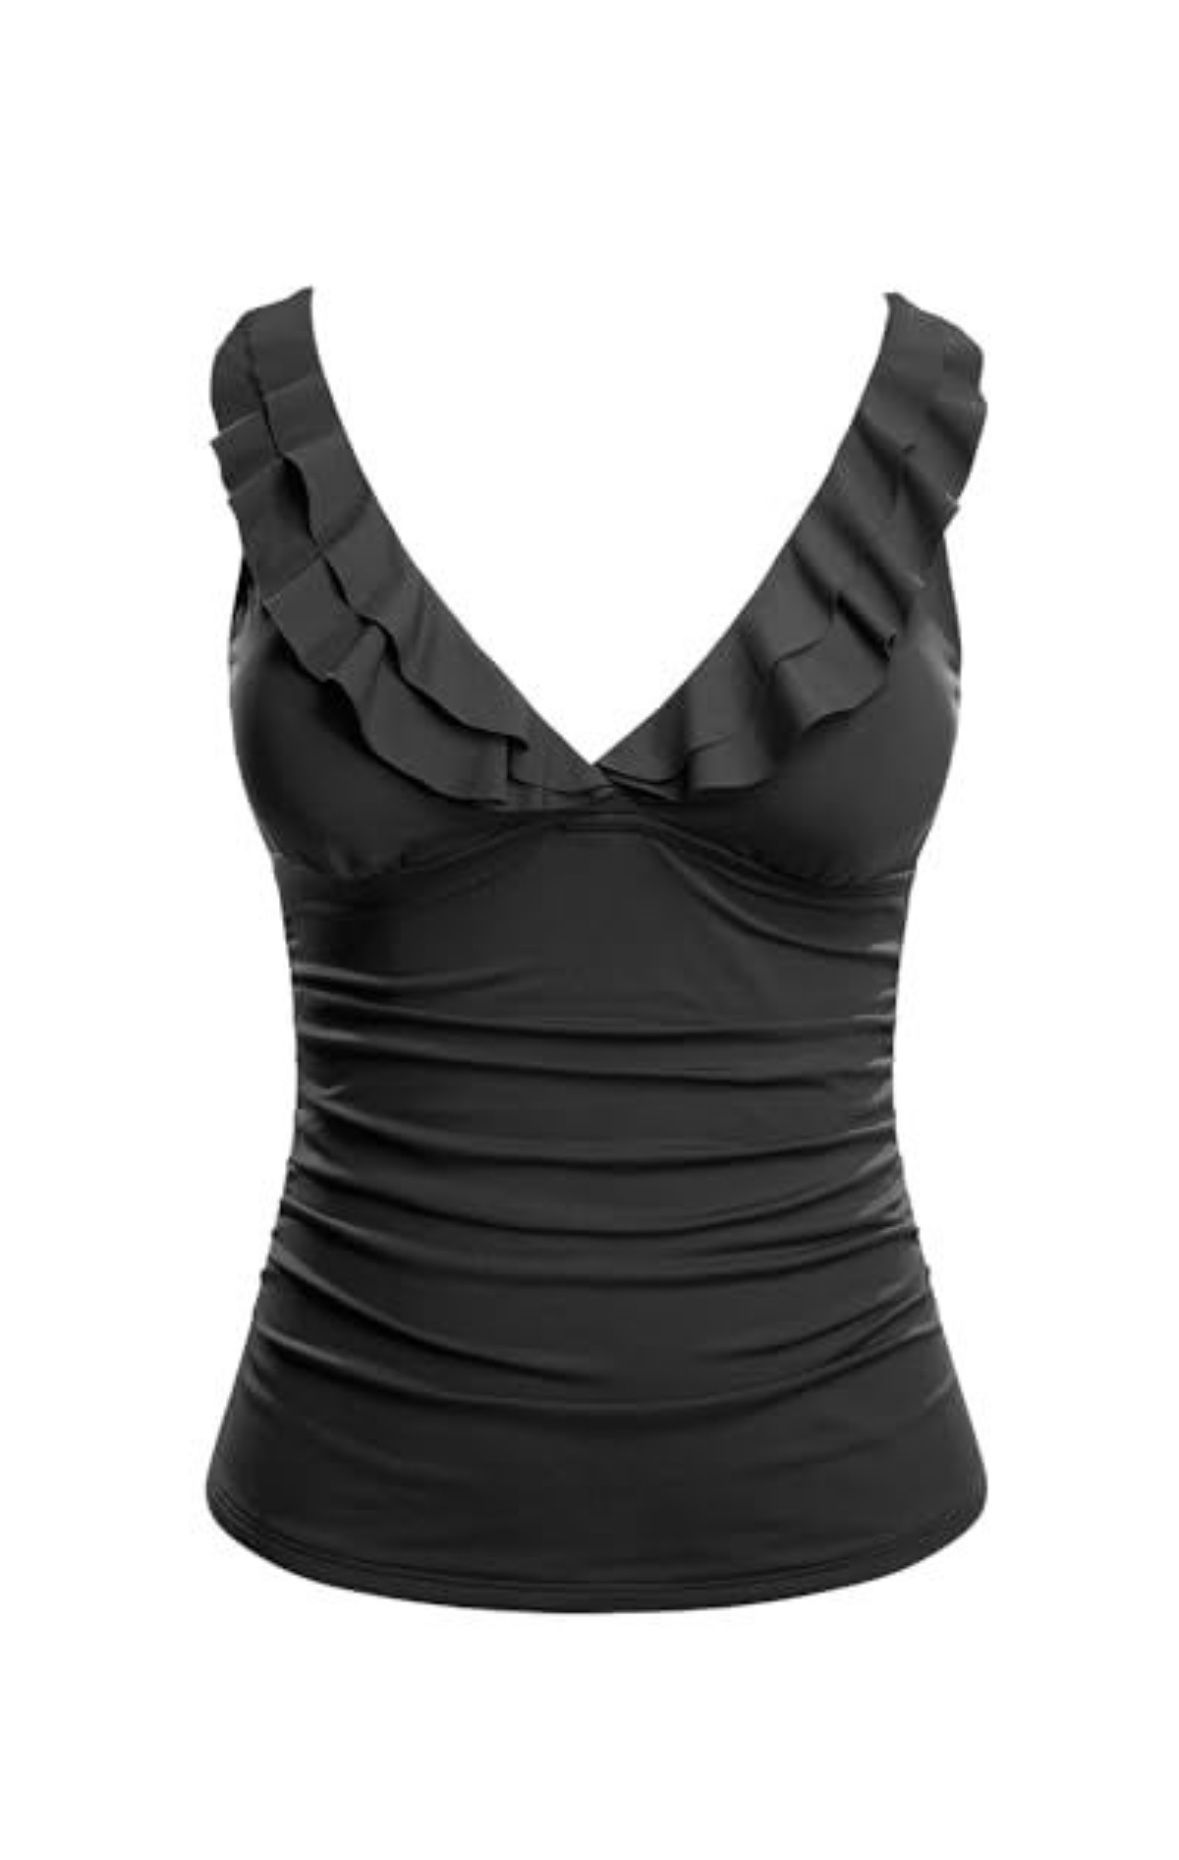 Yonique Womens Tankini Tummy Control Swimsuits, Top Only - Black, Small $17 OBO